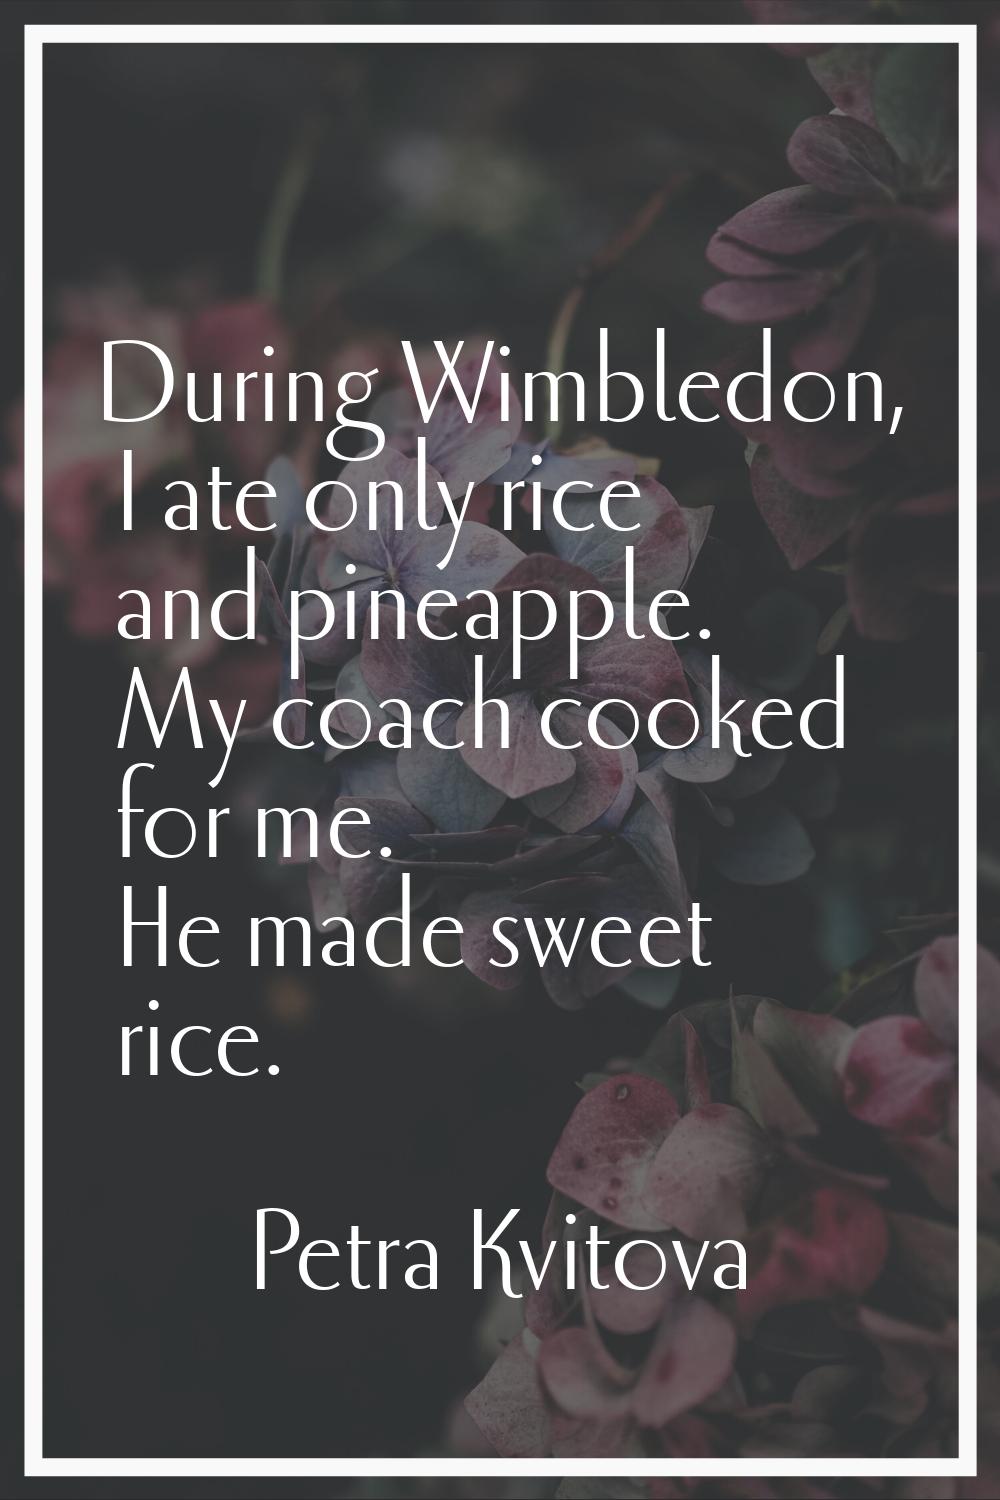 During Wimbledon, I ate only rice and pineapple. My coach cooked for me. He made sweet rice.